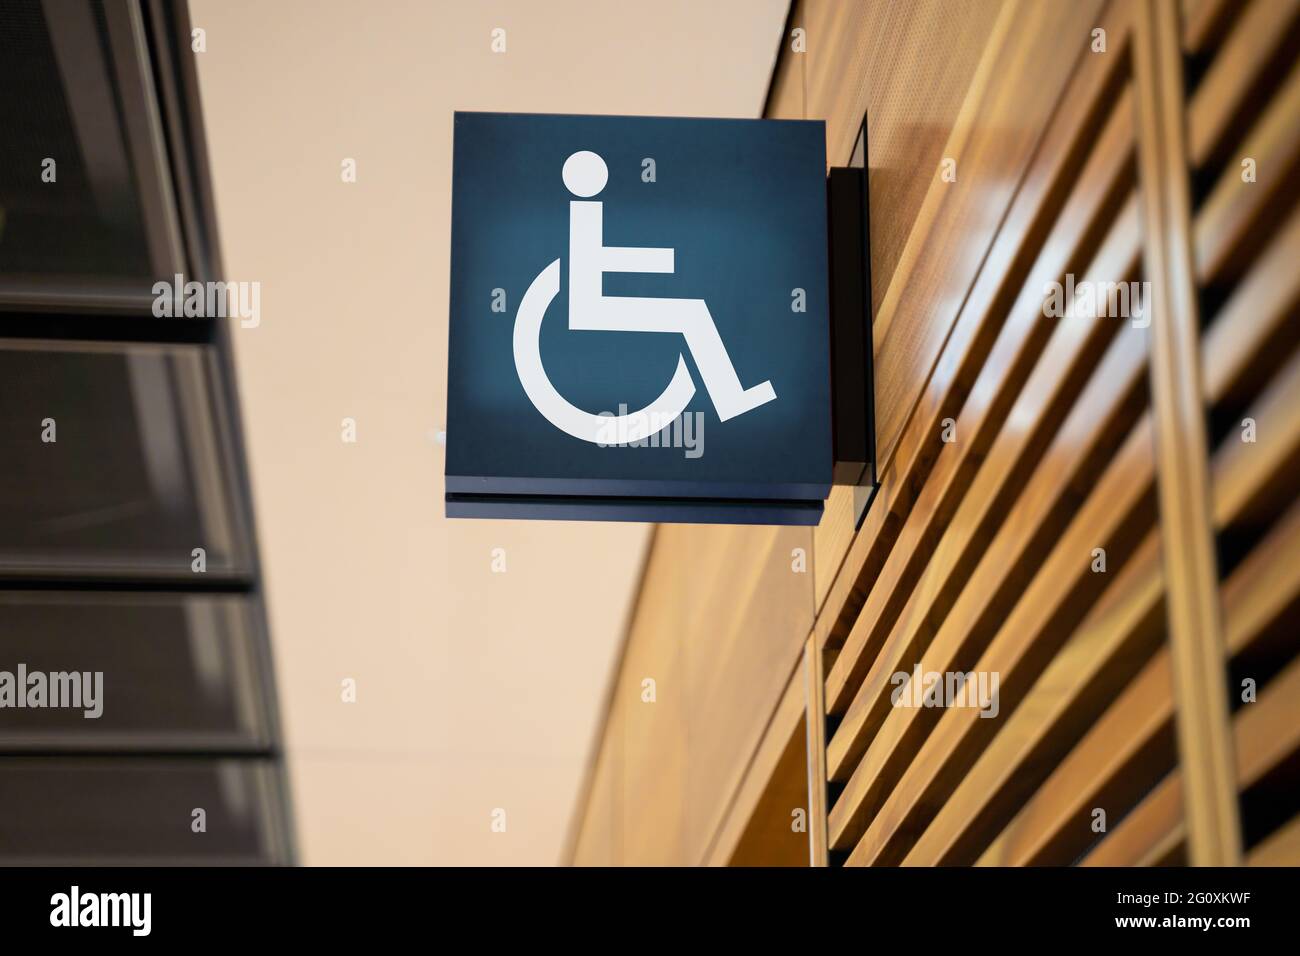 Disabled Or Handicapped Person Public Restroom Sign Stock Photo